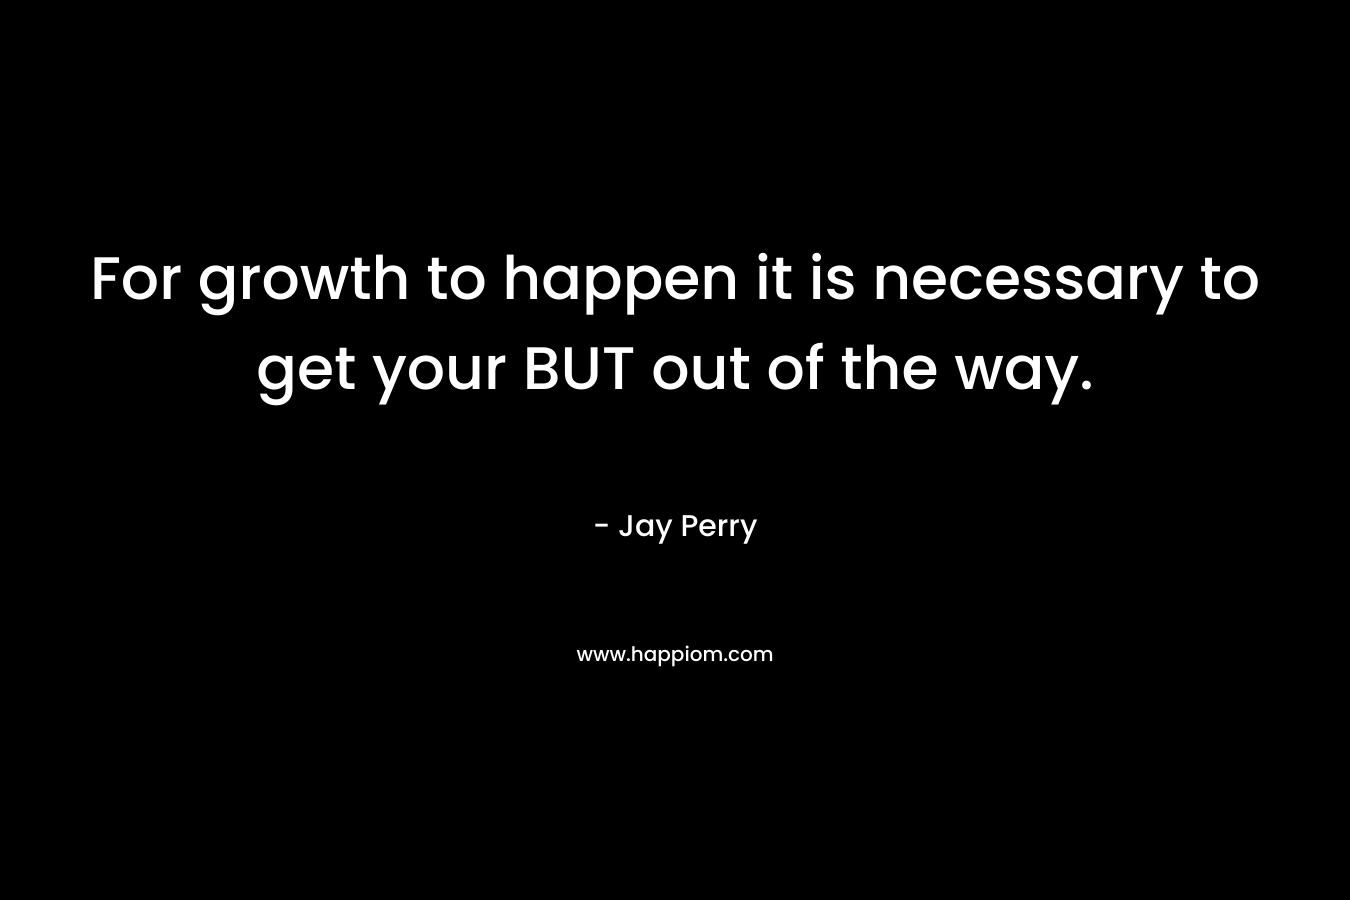 For growth to happen it is necessary to get your BUT out of the way.